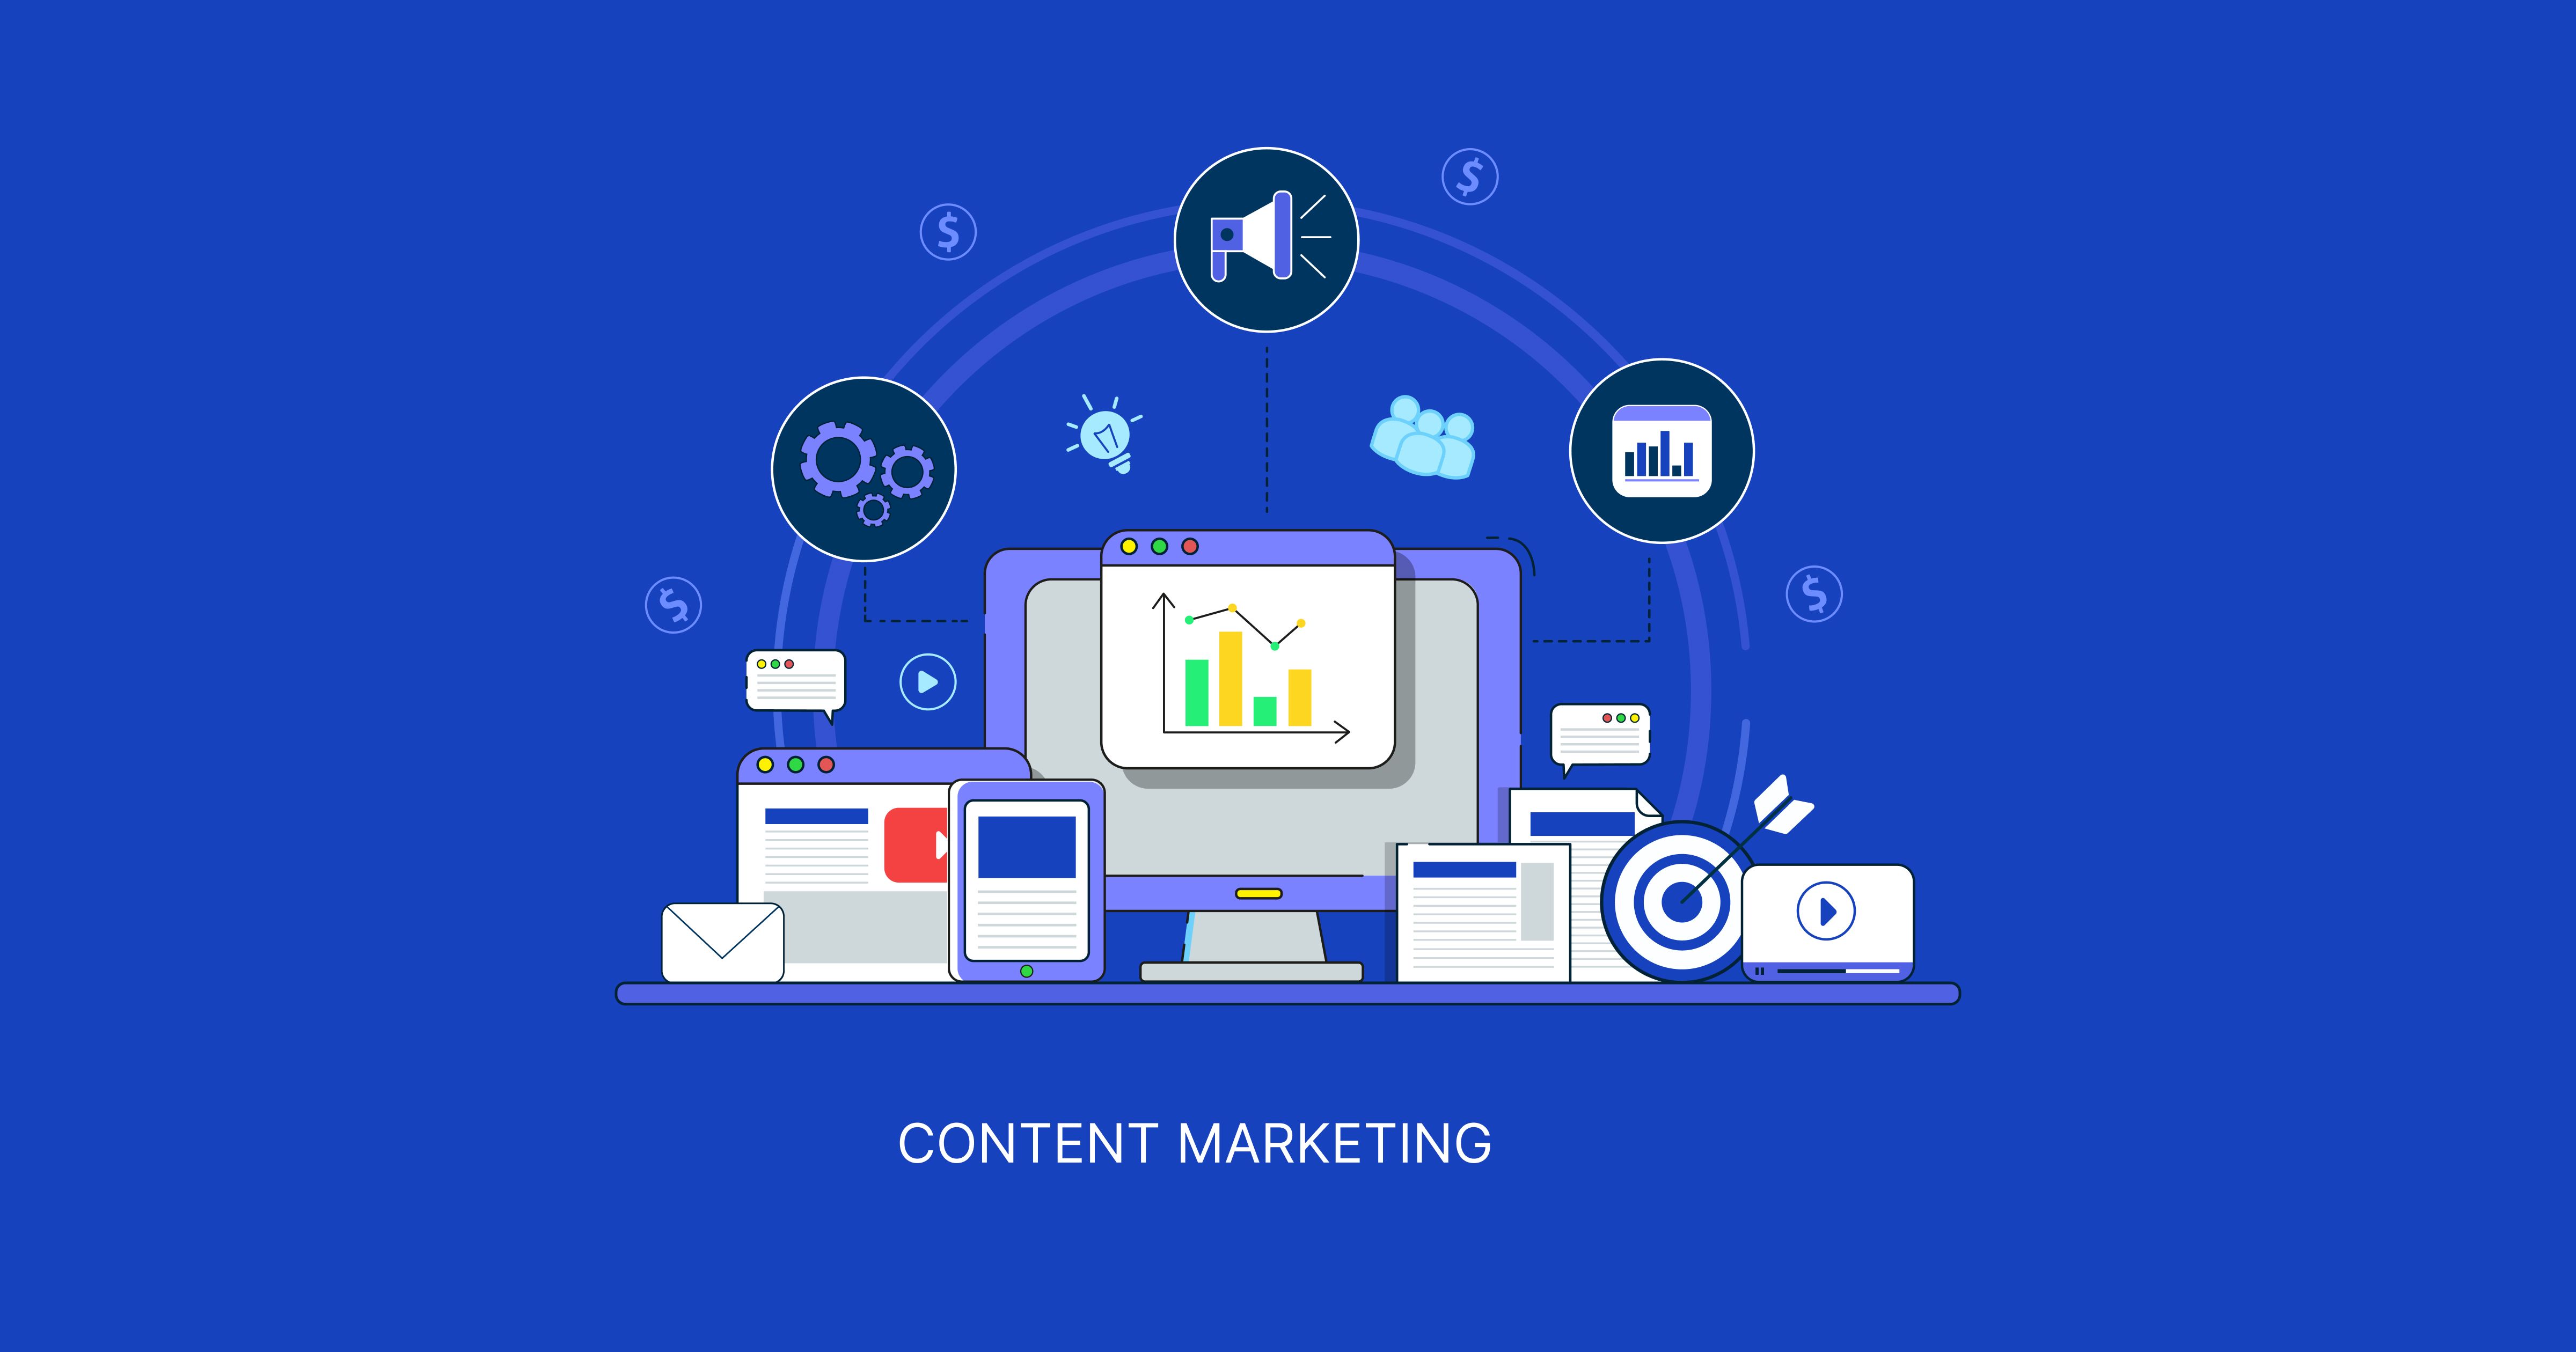 To Use Different Types of Content Marketing in Your Strategy?